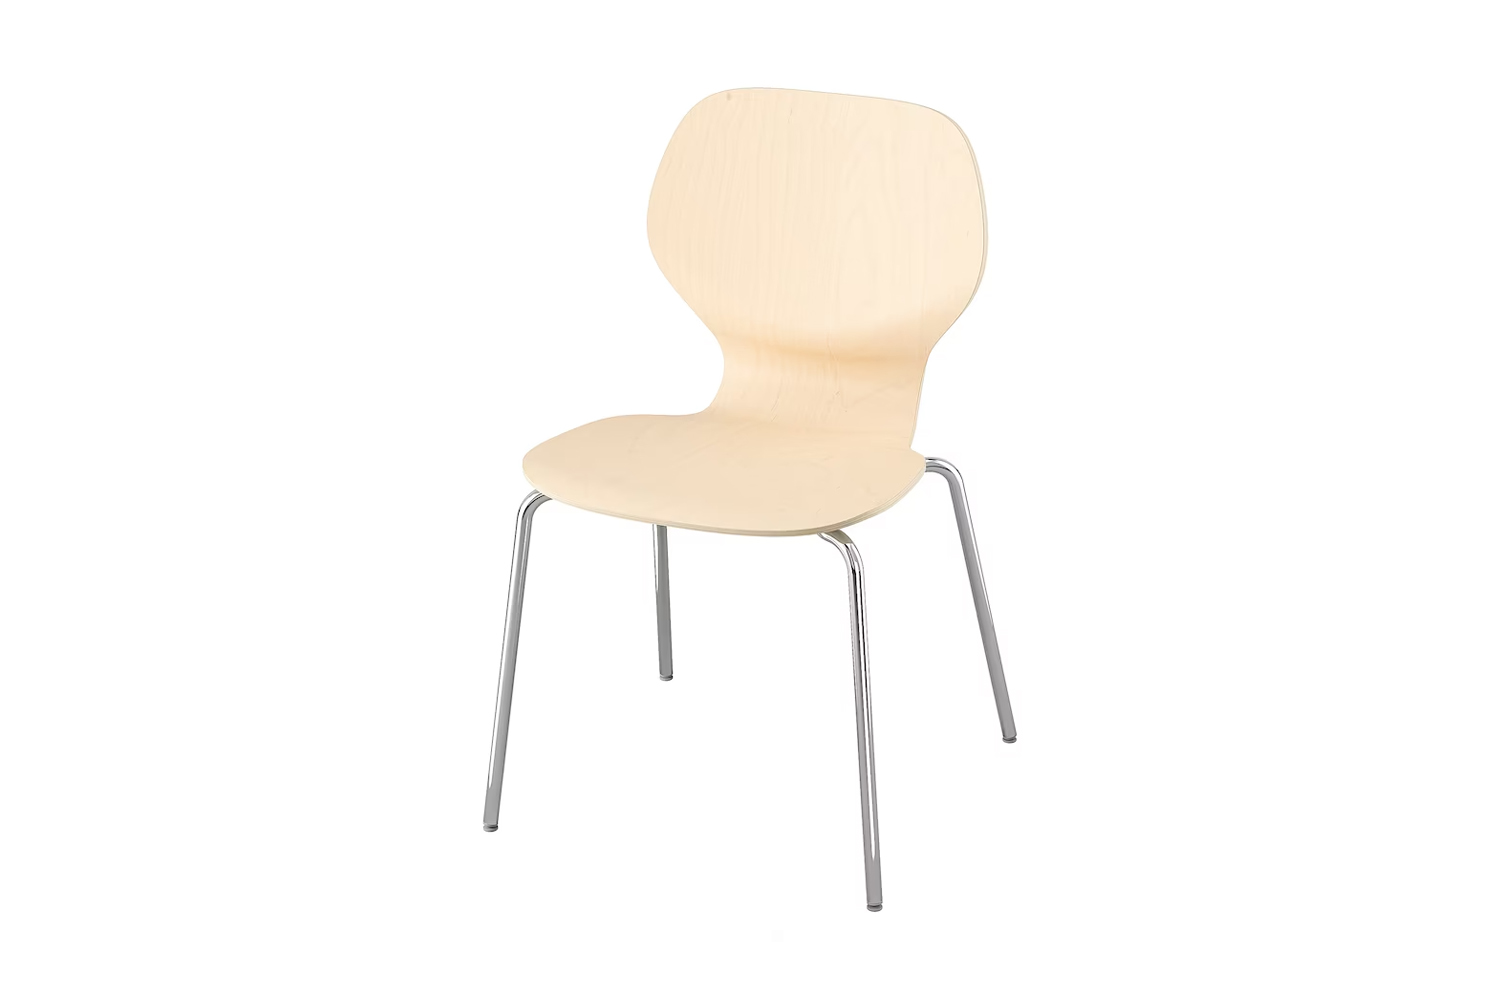 the ikea sigtrygg chair in birch is \$75. 17